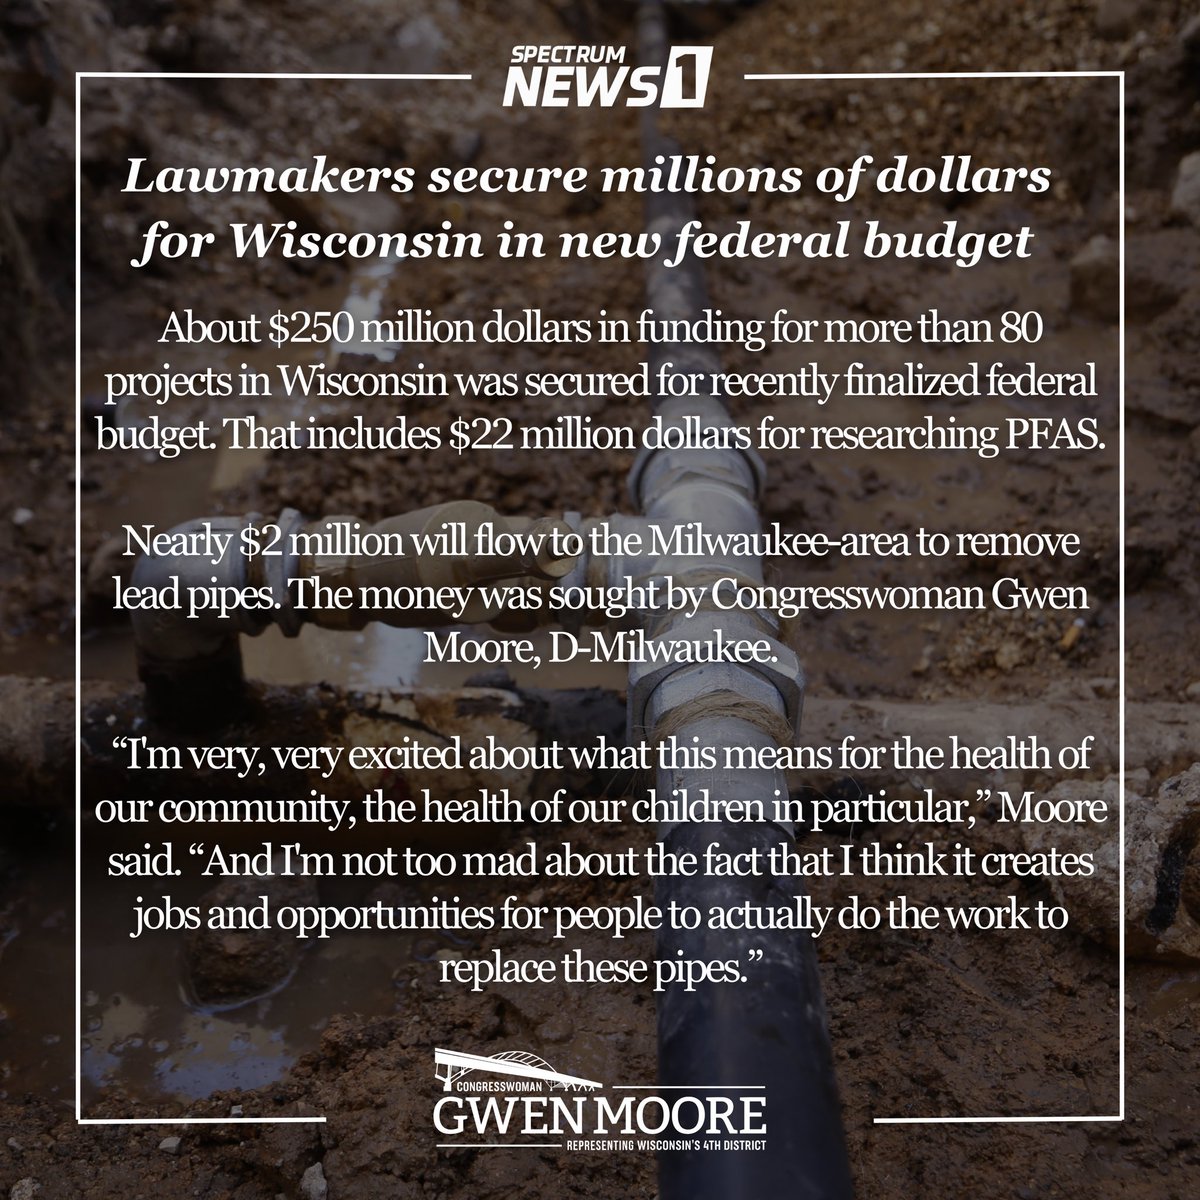 It’s a privilege to fight for the funding Wisconsin deserves, especially when it comes to something as simple as the right to clean water. These federal dollars are paving the way for generations of children to grow up healthier.